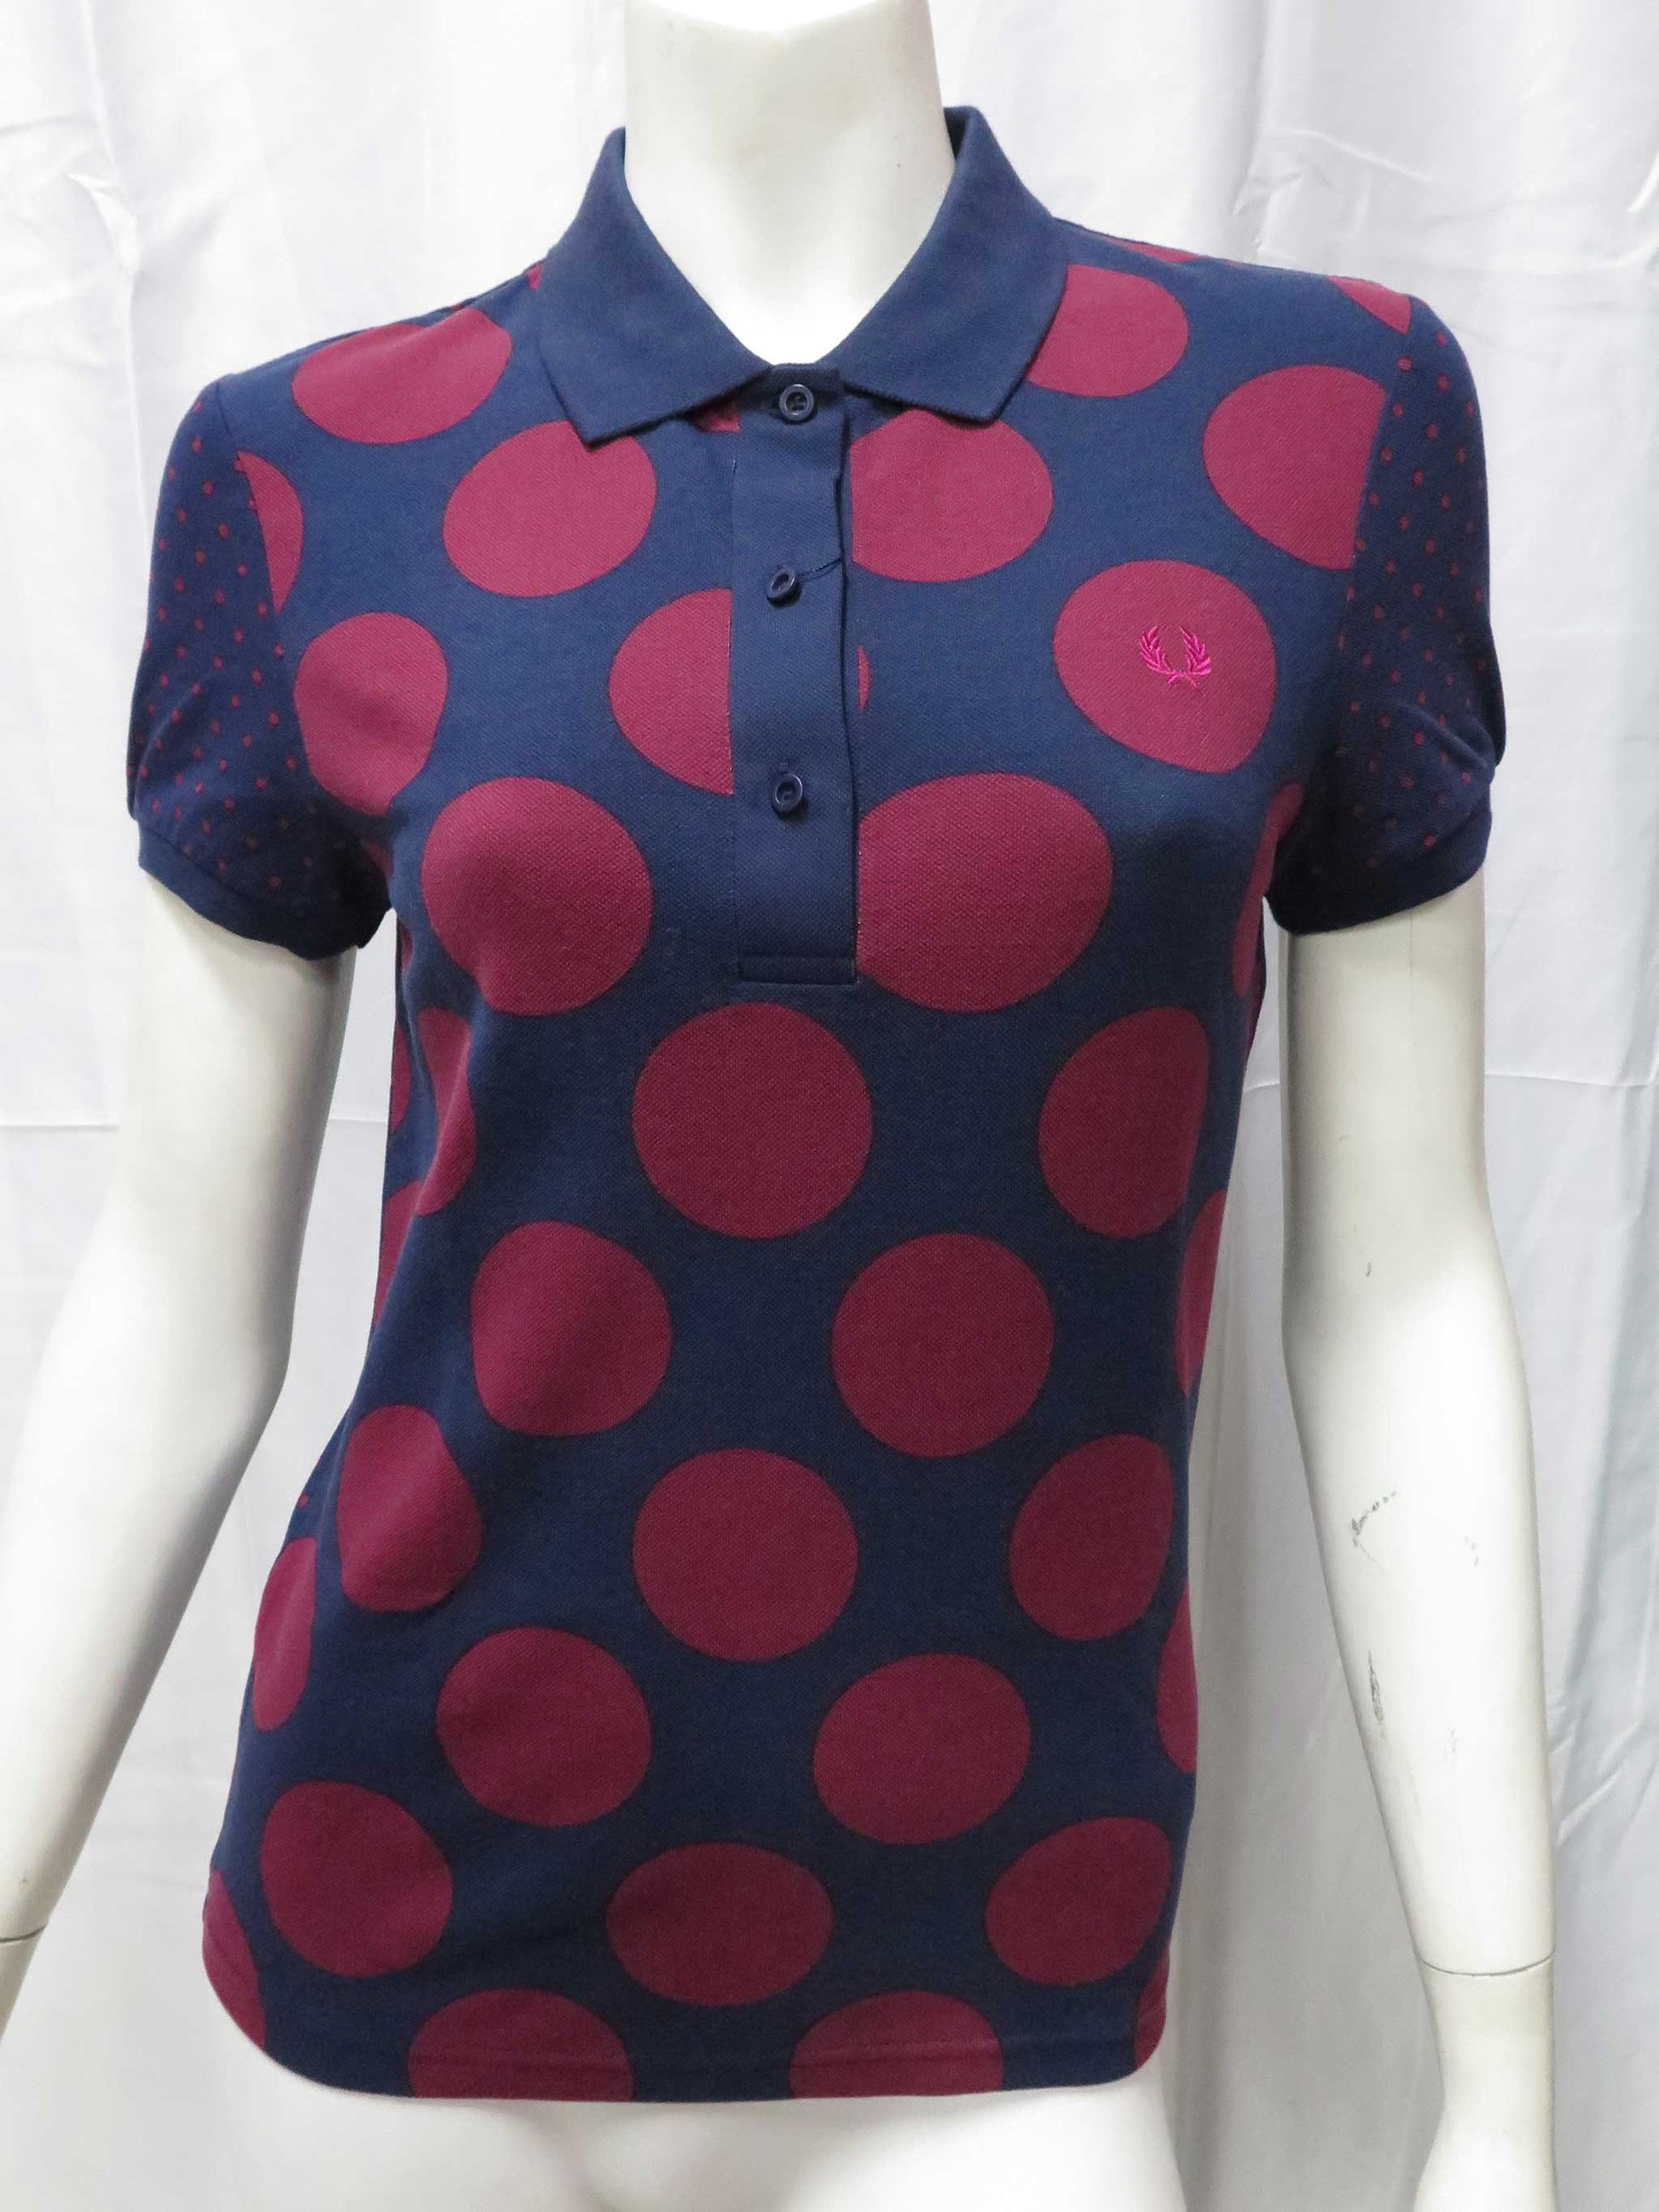 LADIES DOUBLE DOT FRED PERRY SHIRT (DARK CARBON/MAROON)